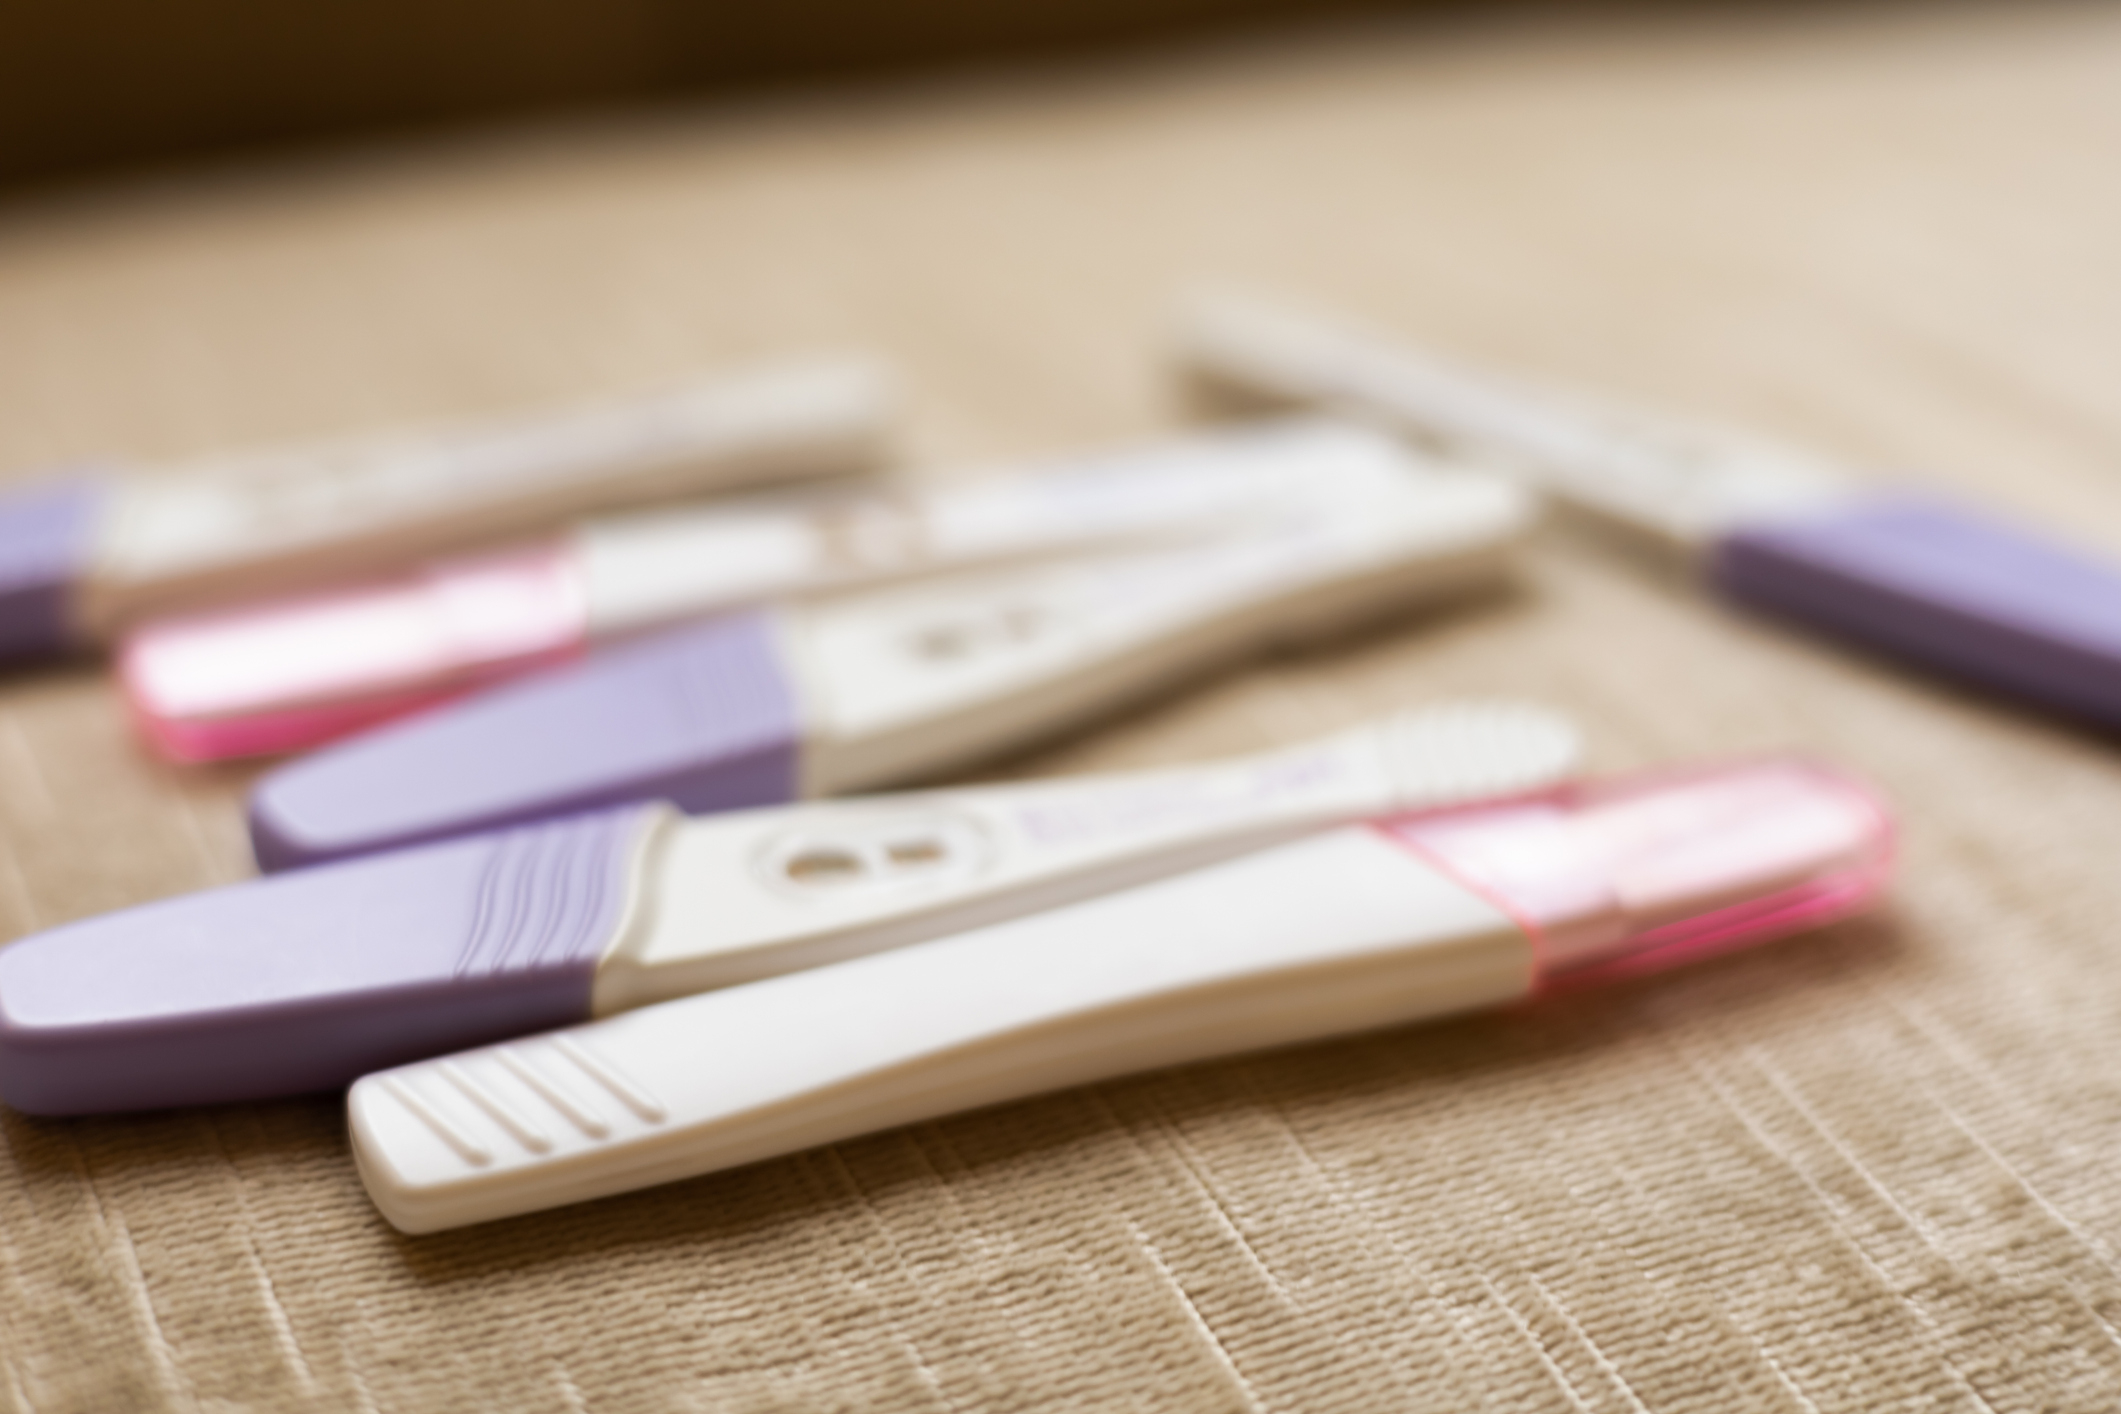 A row of pregnancy tests